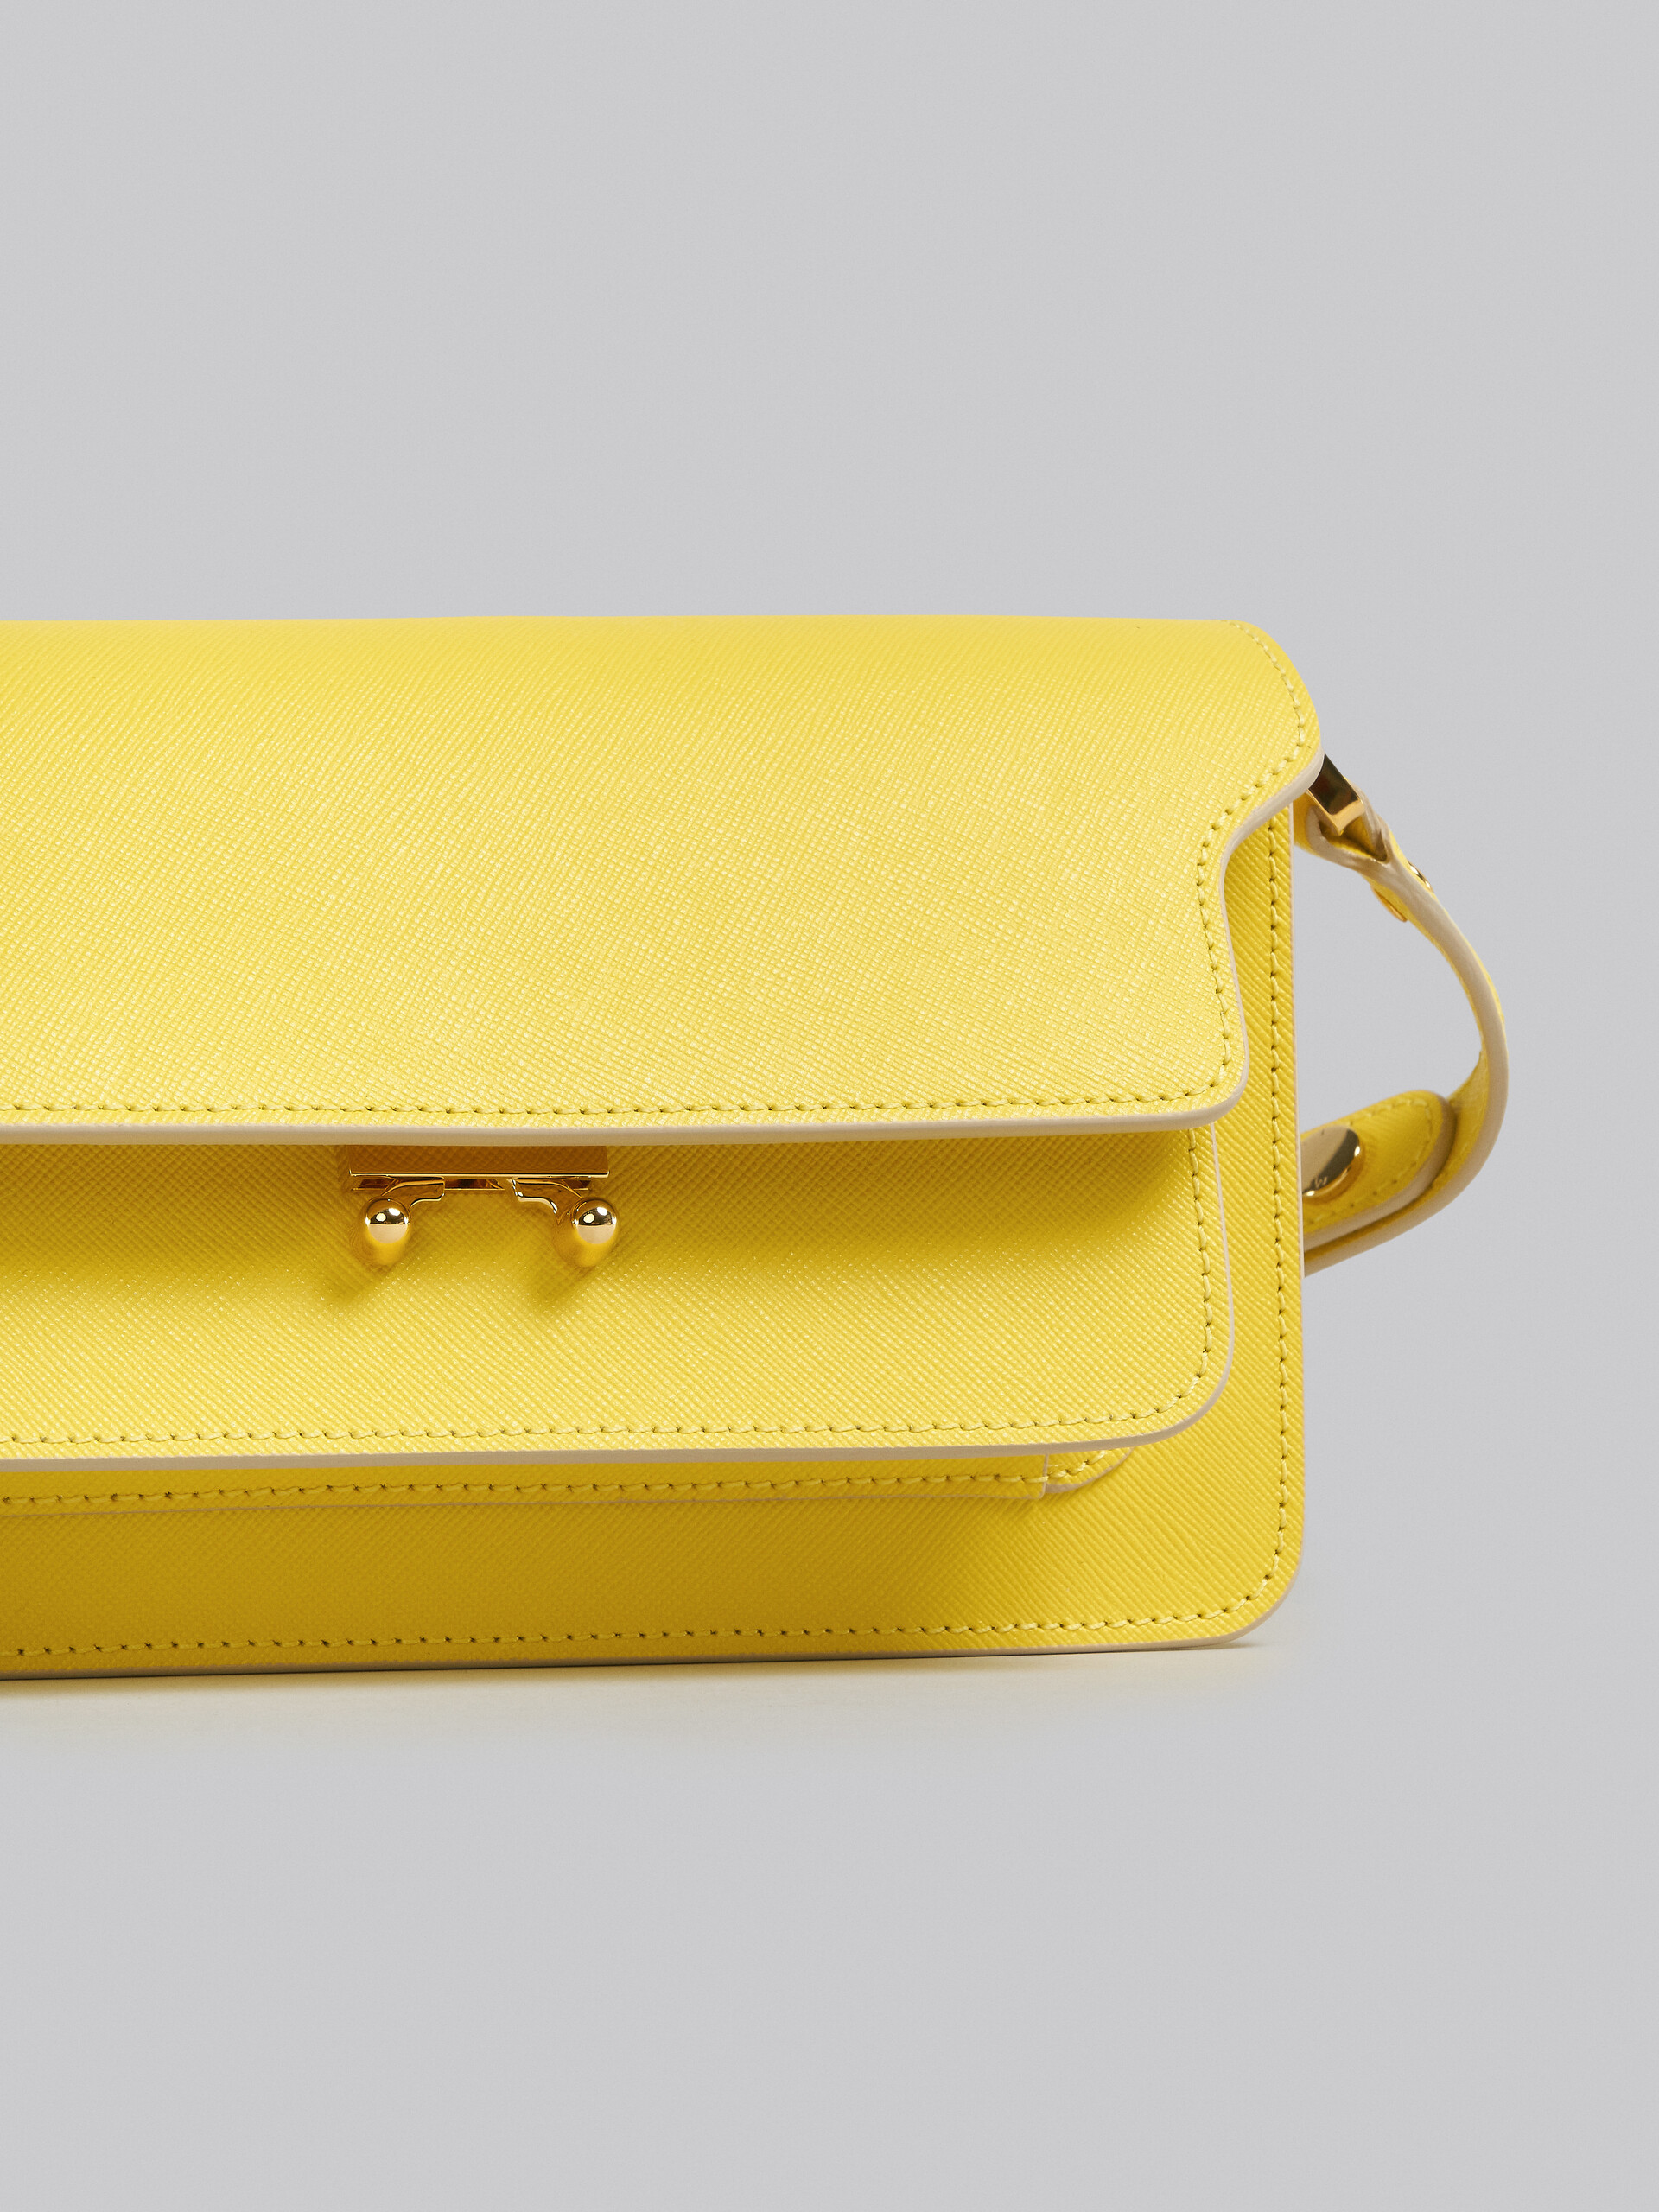 TRUNK Bag In Single Color Calfskin ‎ from the Marni ‎Fall Winter